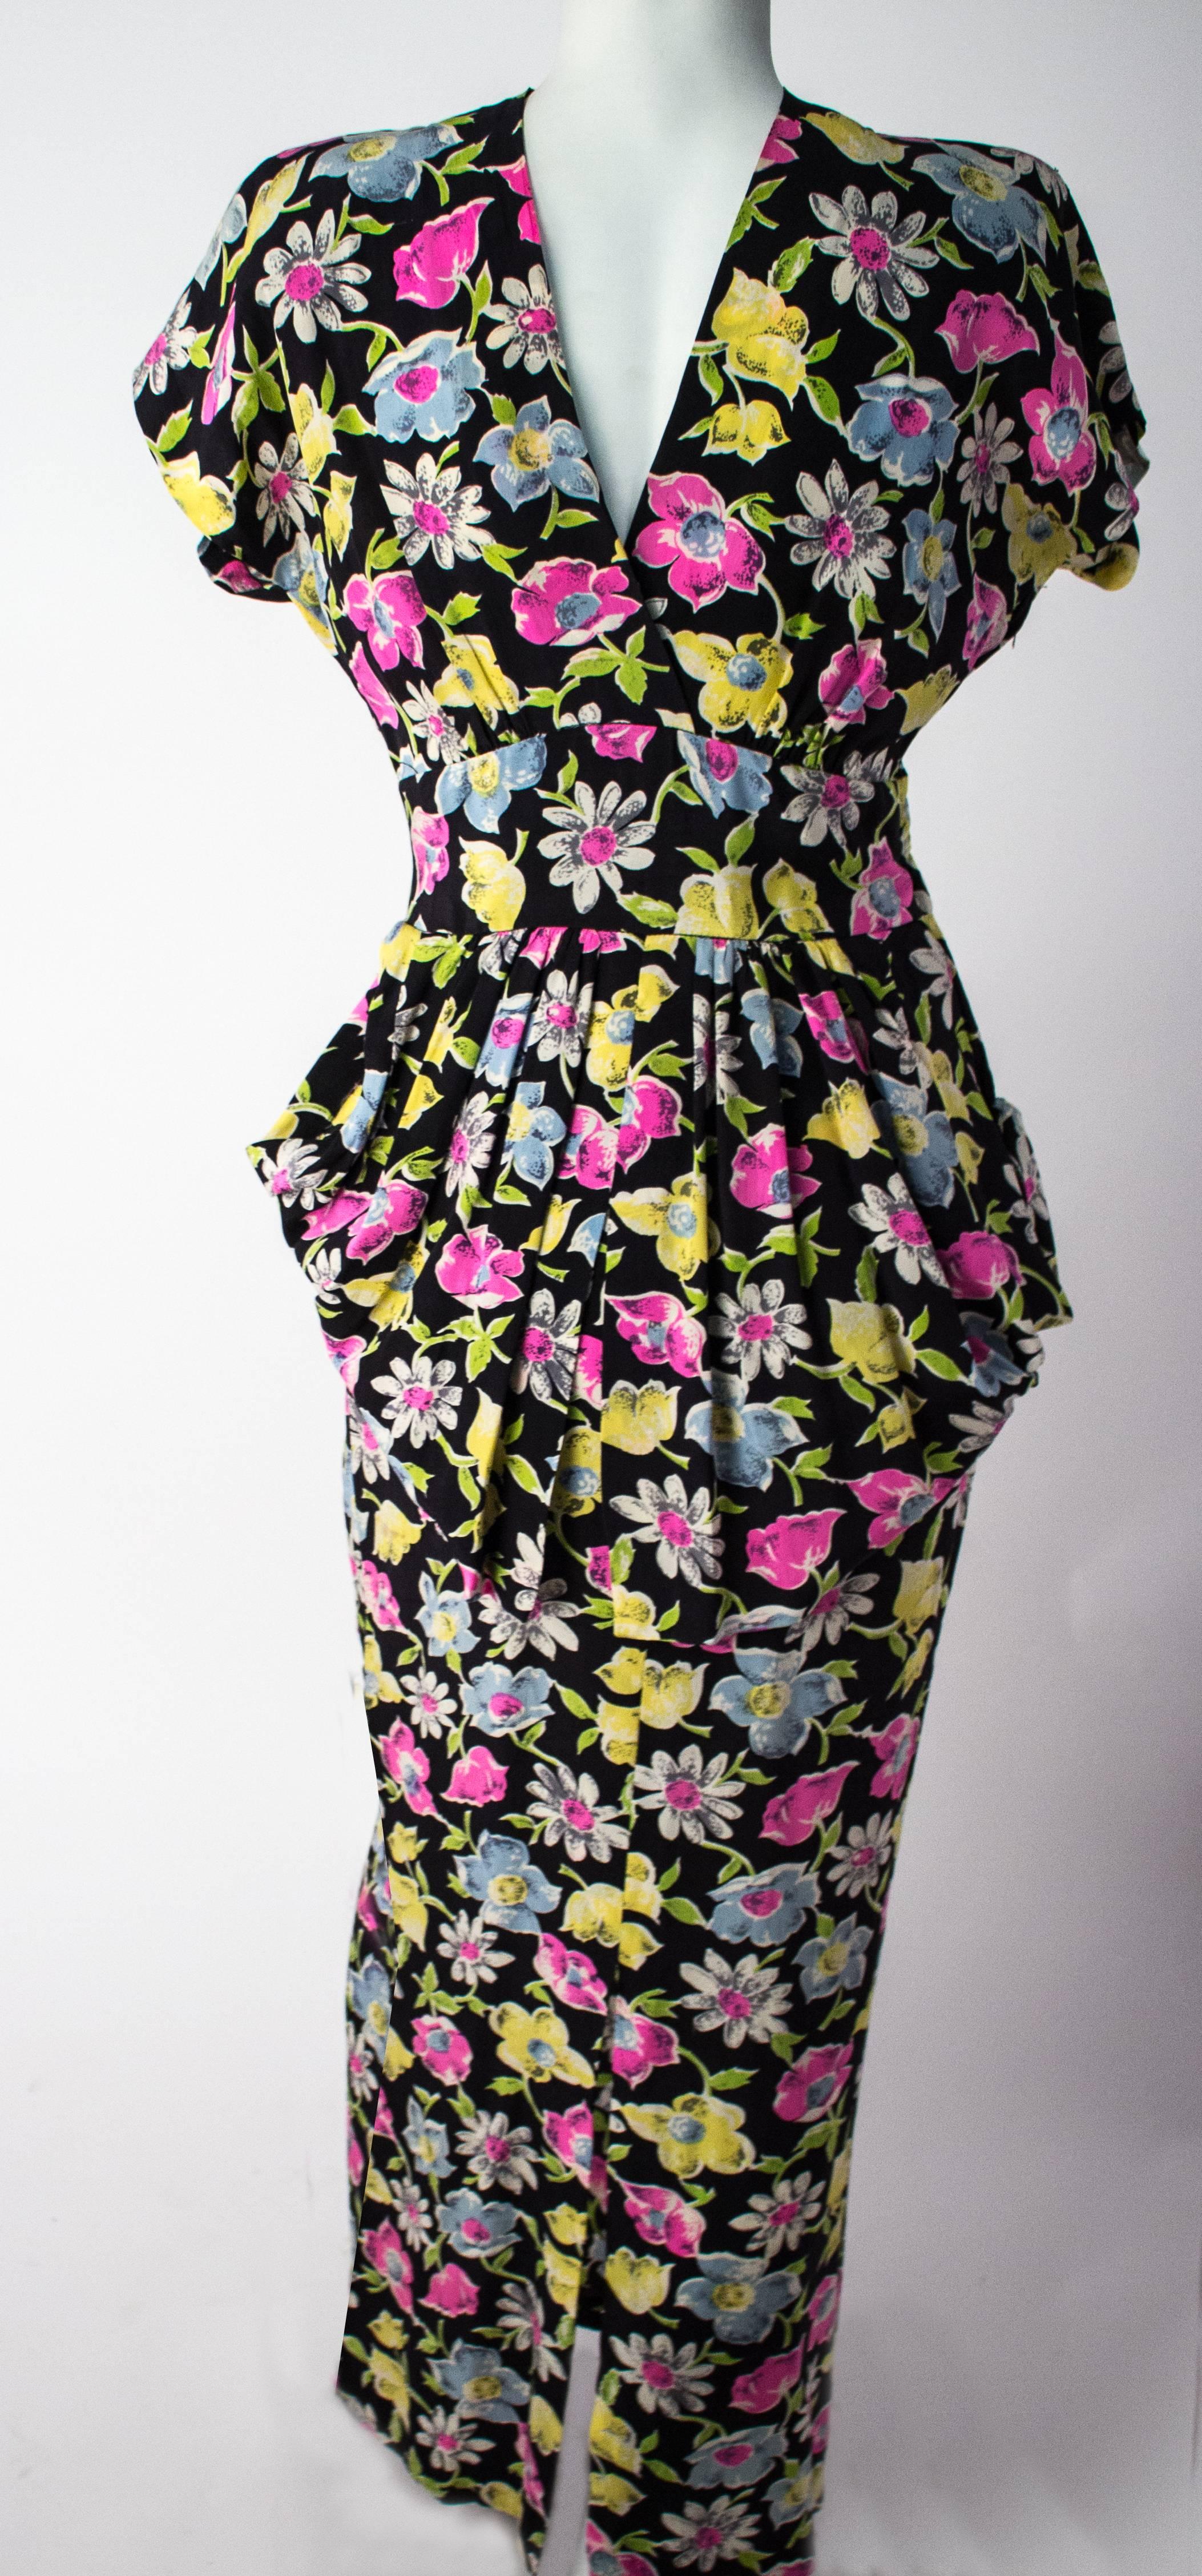 40s Floral Printed Silk Peplum Dress. Metal side zip closure. This manniquin is styled with the dress worn backwards, it can be worn either way for more versatility. 